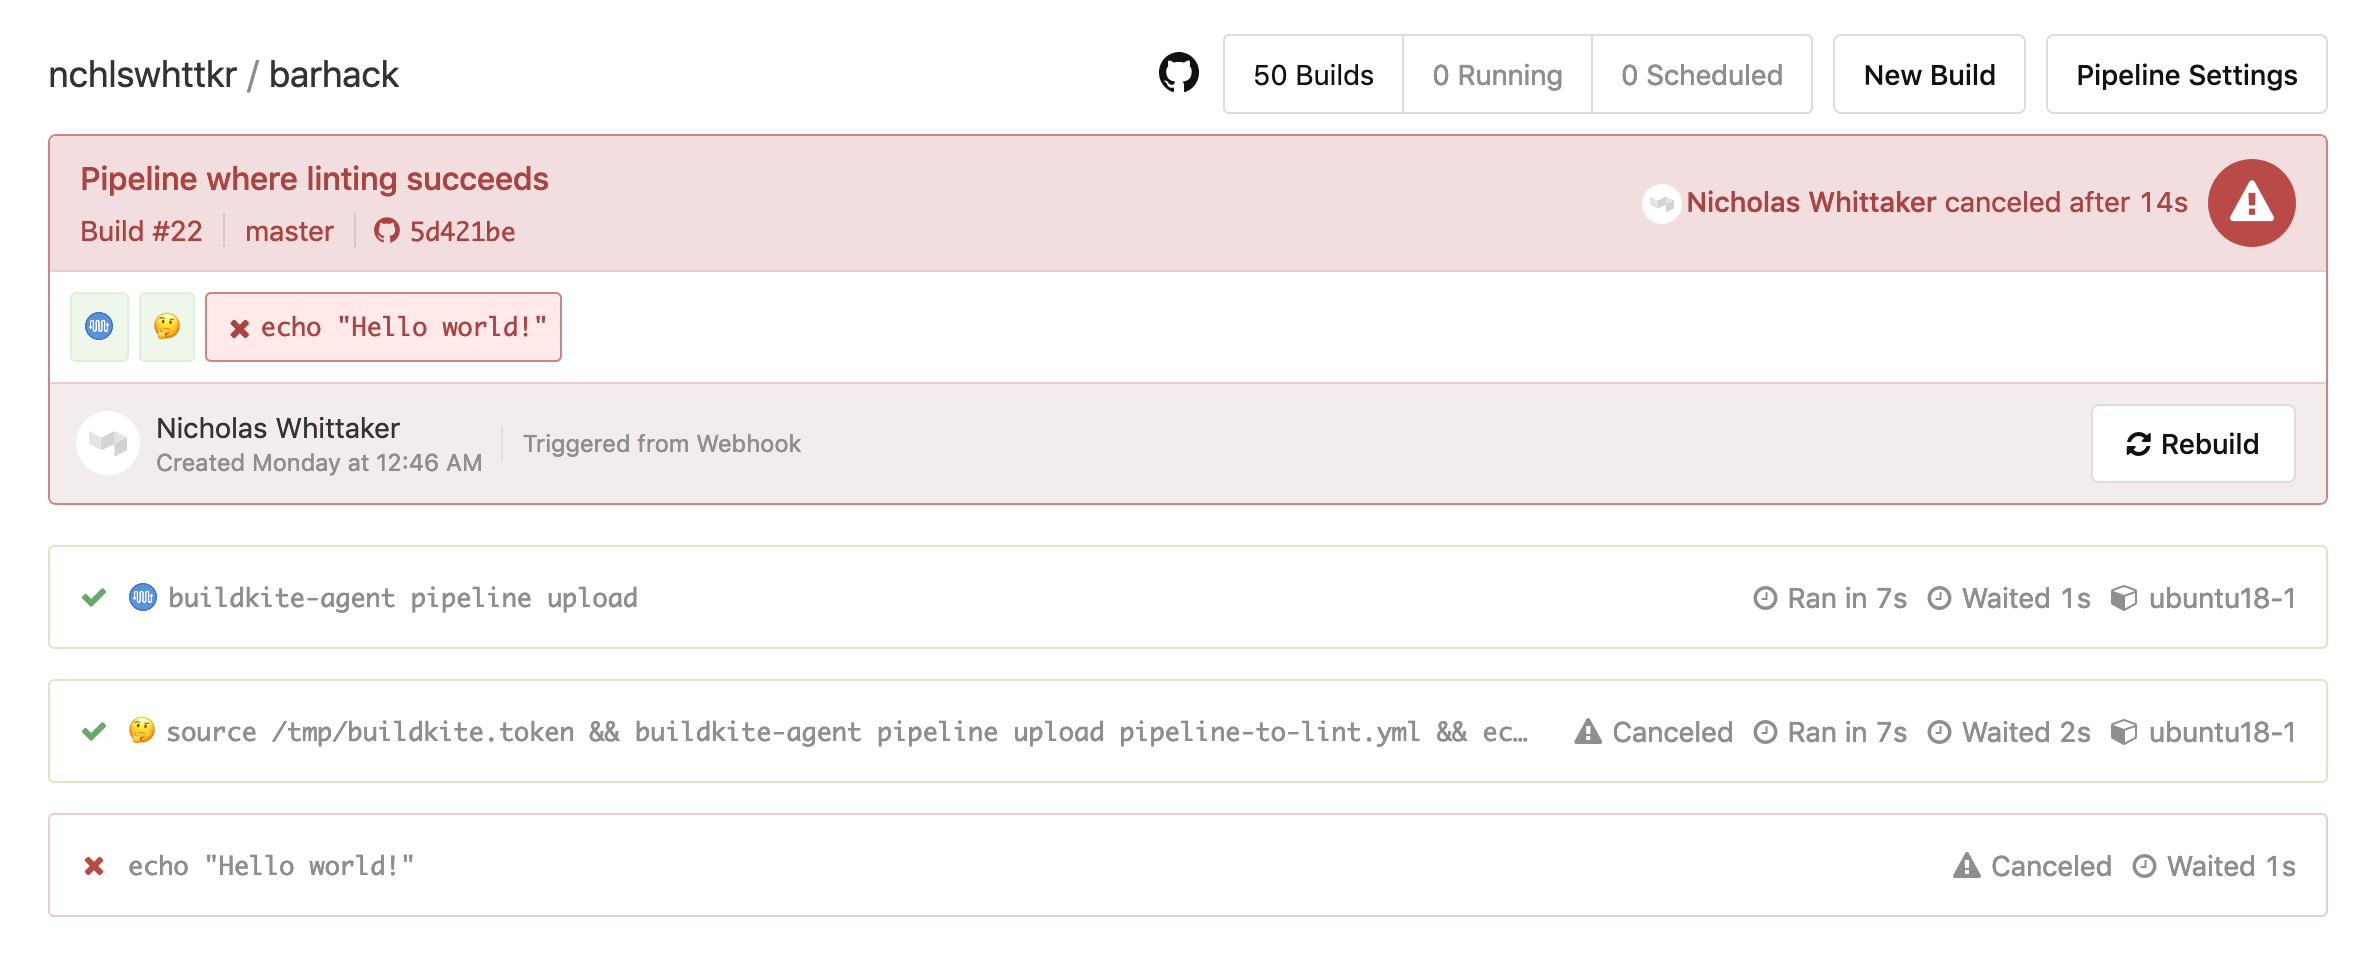 A build in Buildkite, where the job to upload the target pipeline file has succeeded and the build is subsequently cancelled